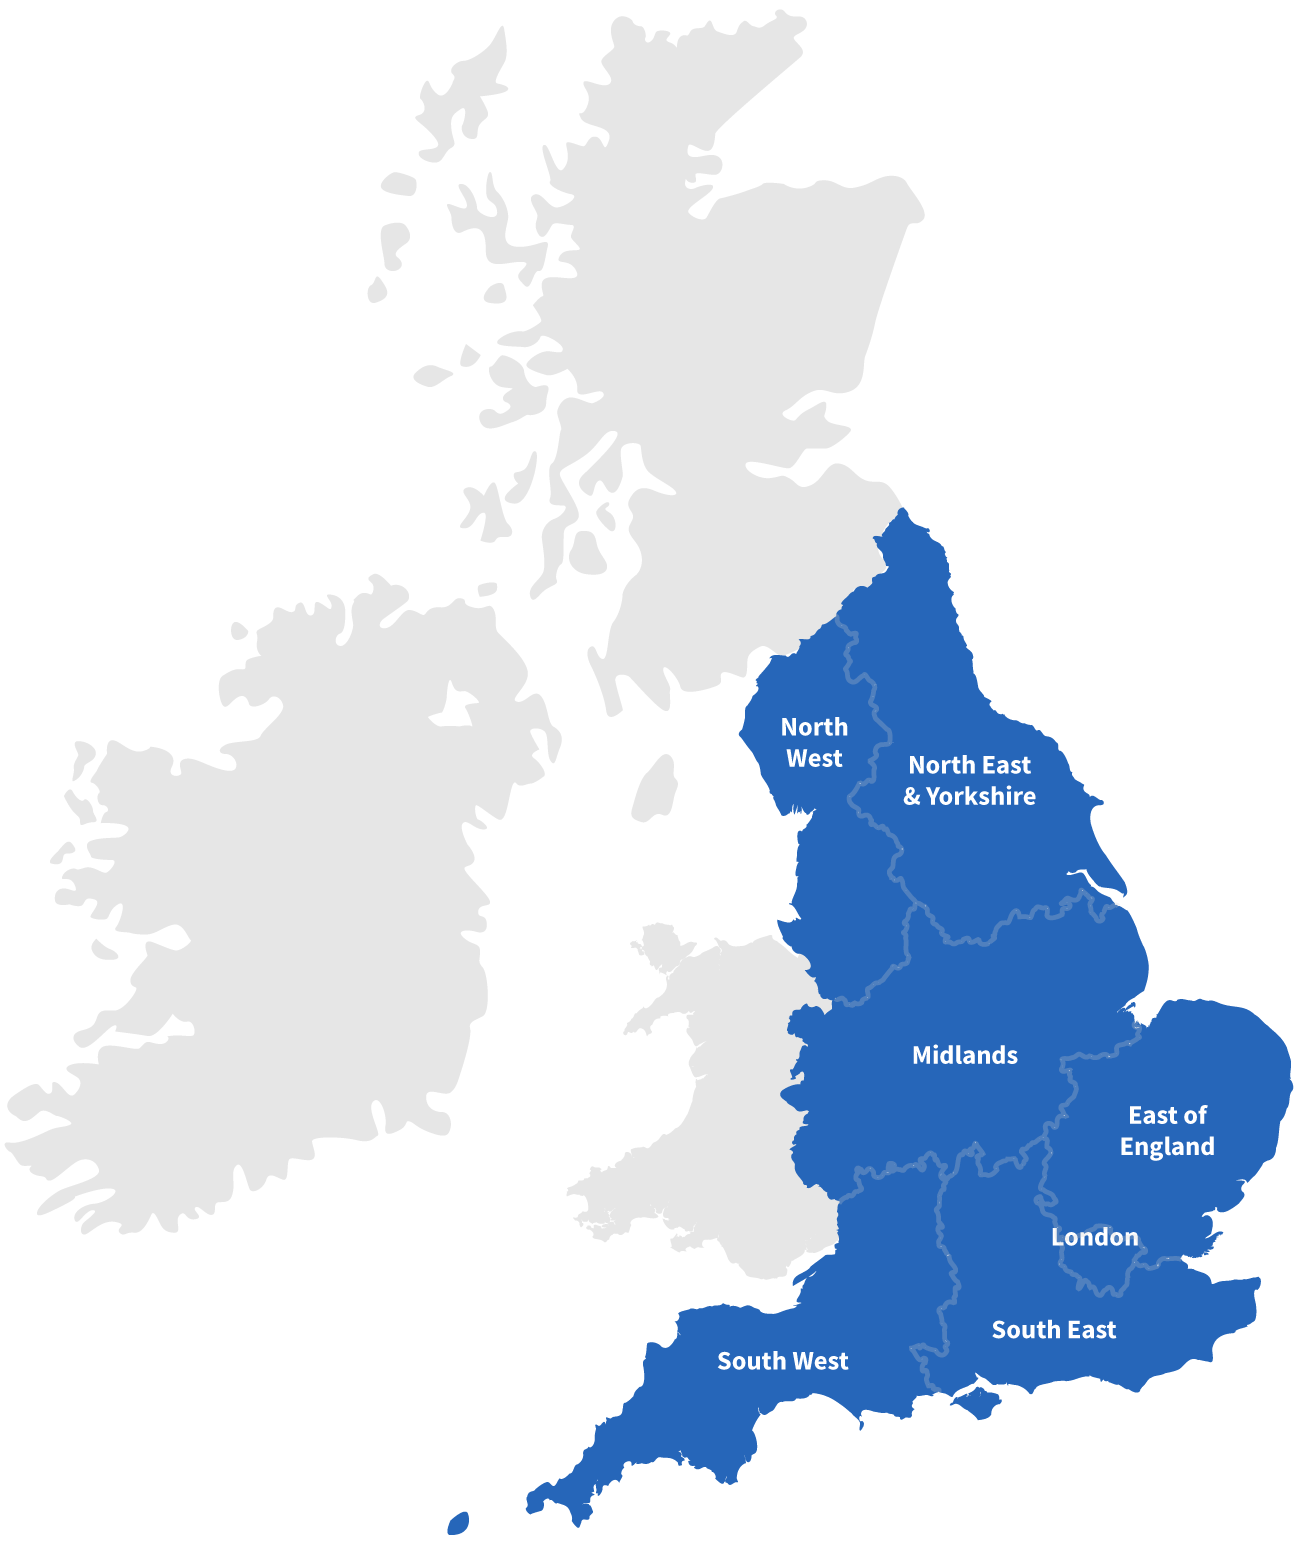 NHS map of England regions